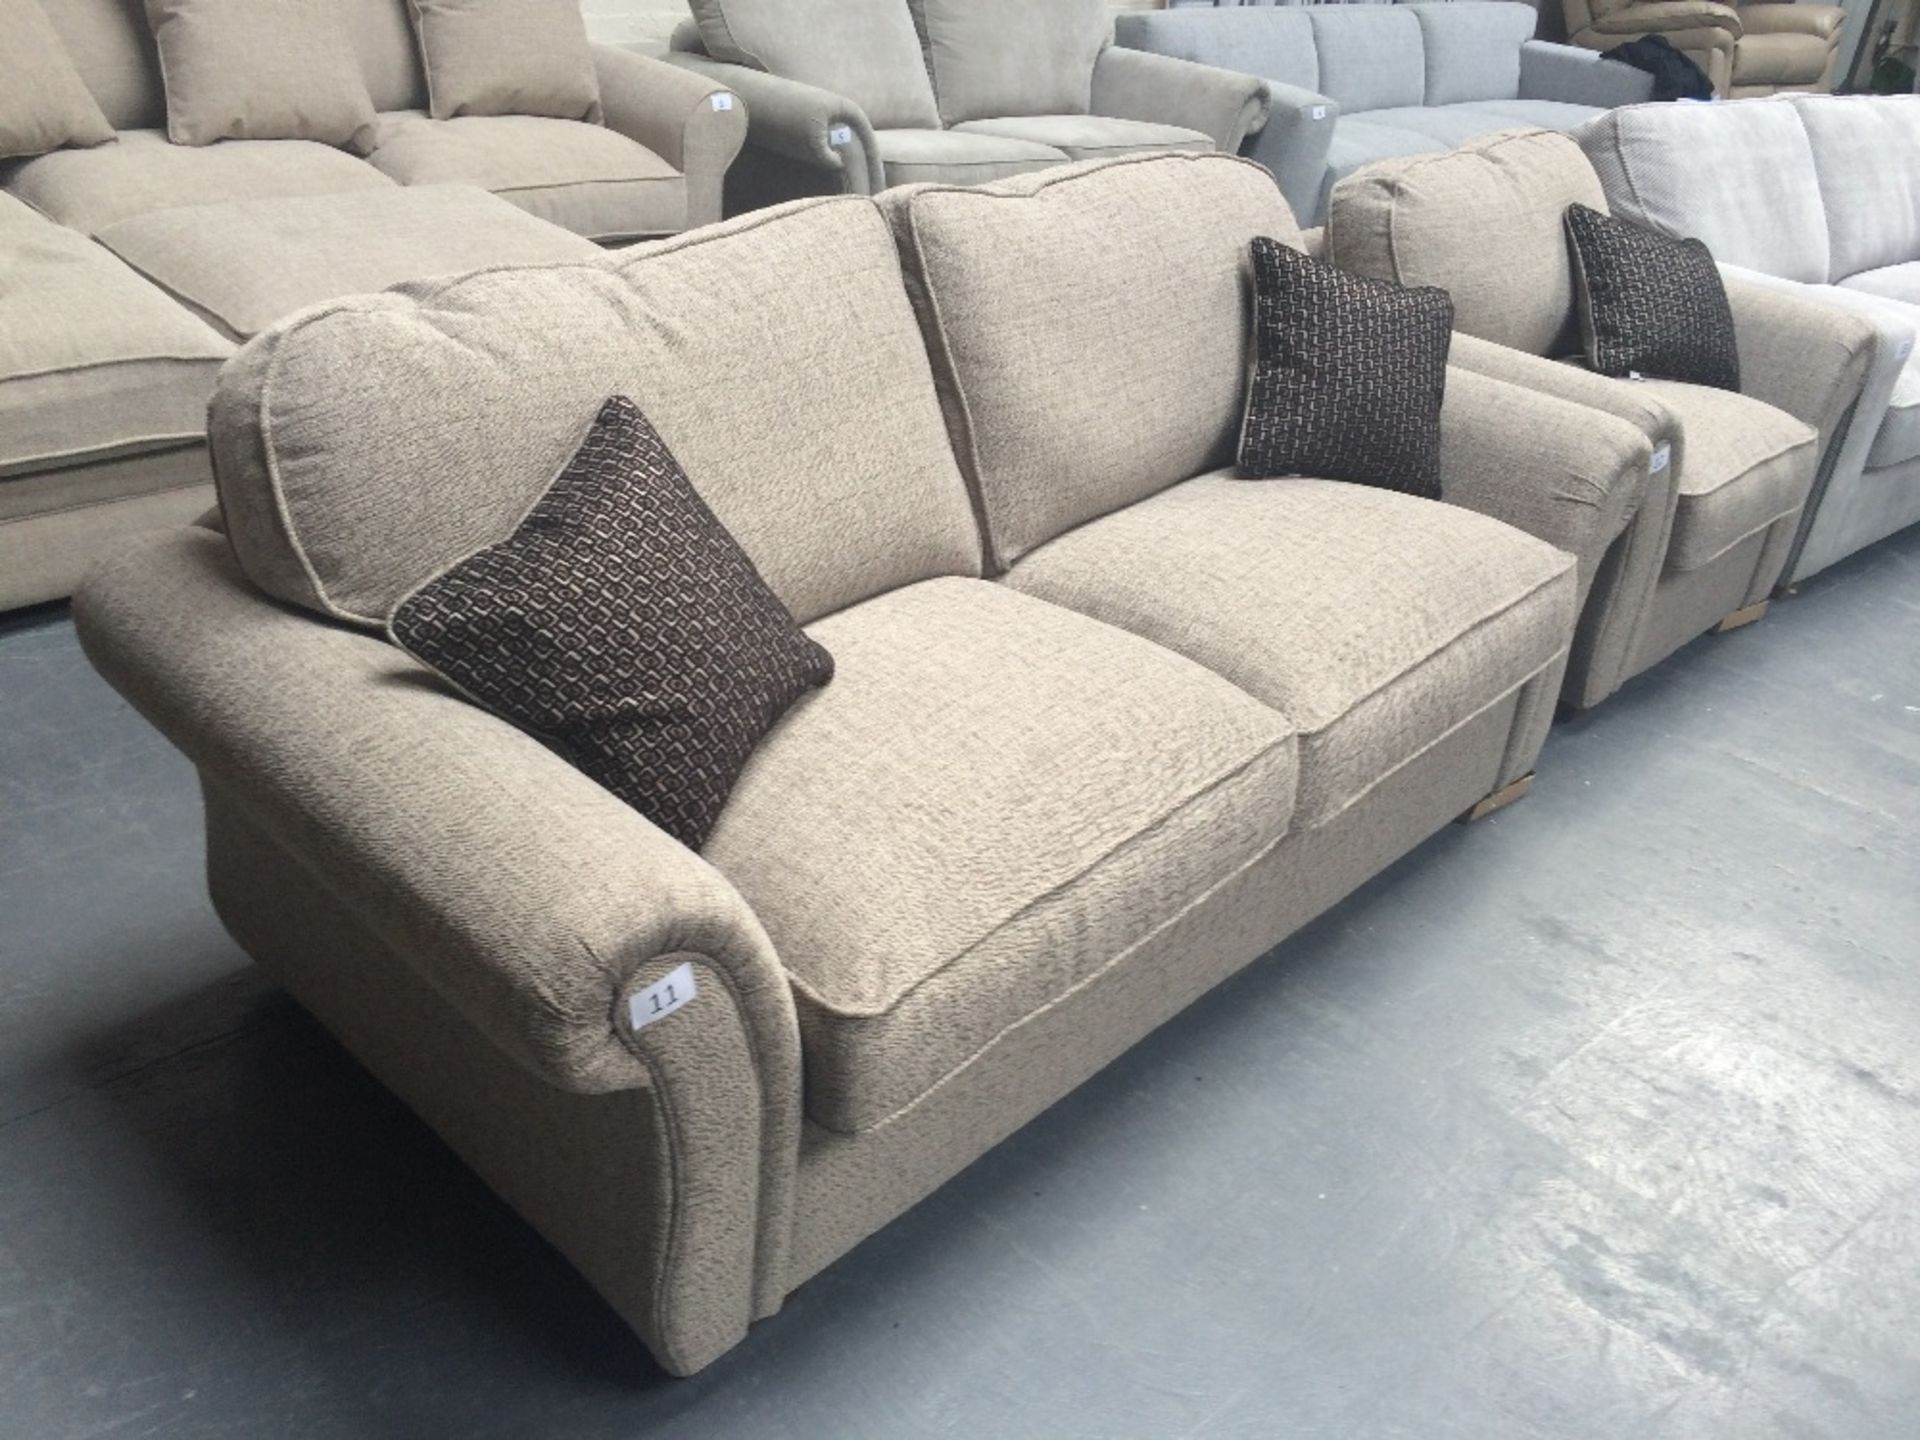 Light Brown Upholstered Three Seater Sofa - Image 2 of 2